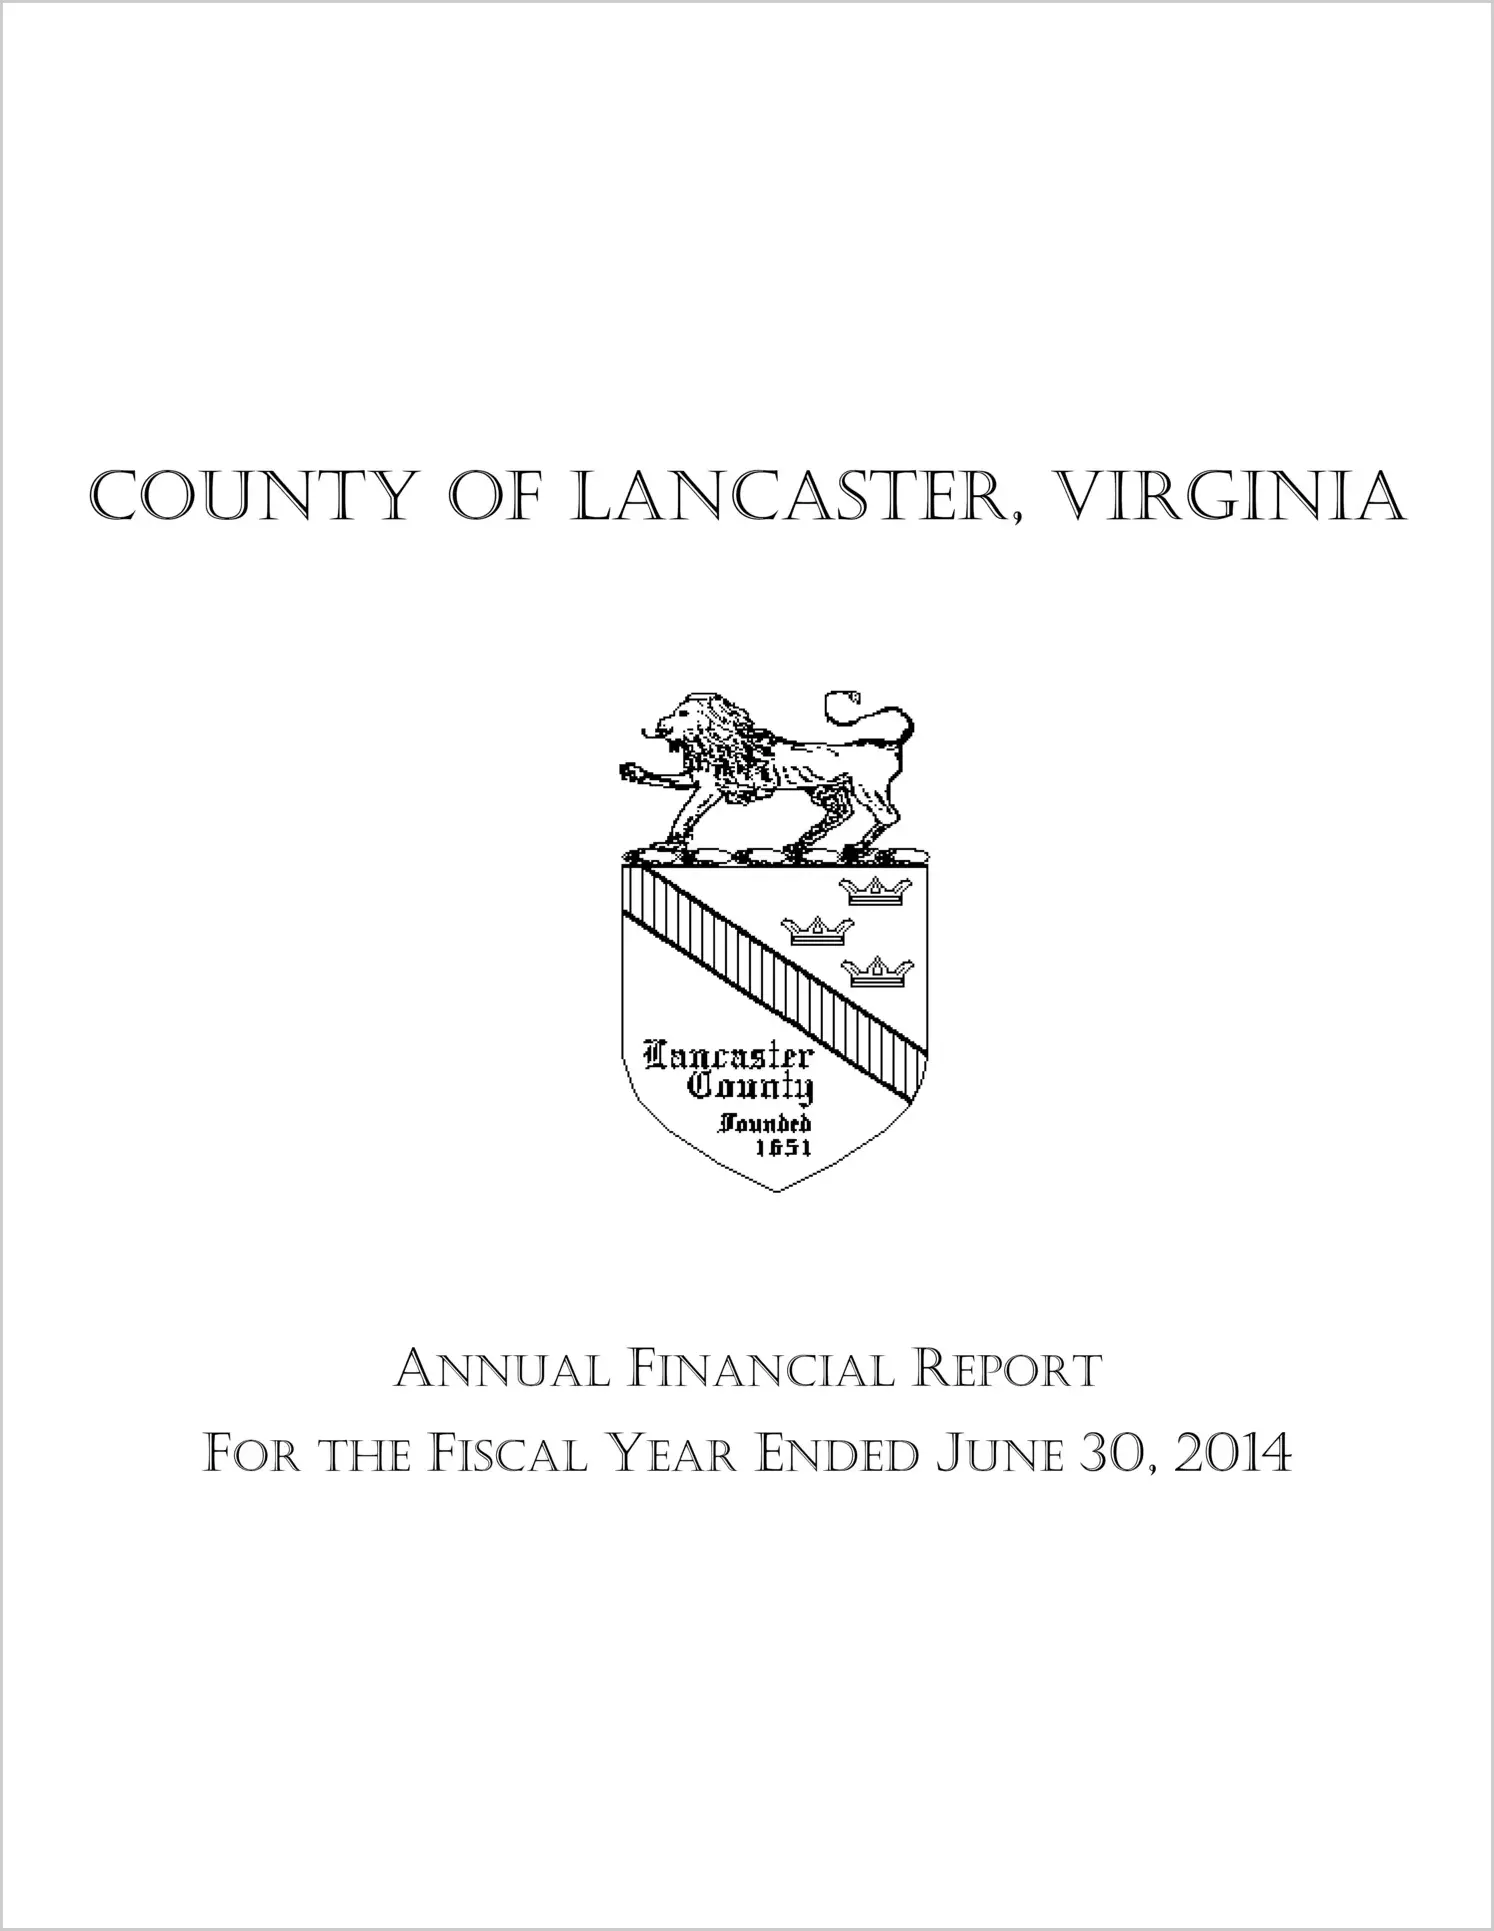 2014 Annual Financial Report for County of Lancaster